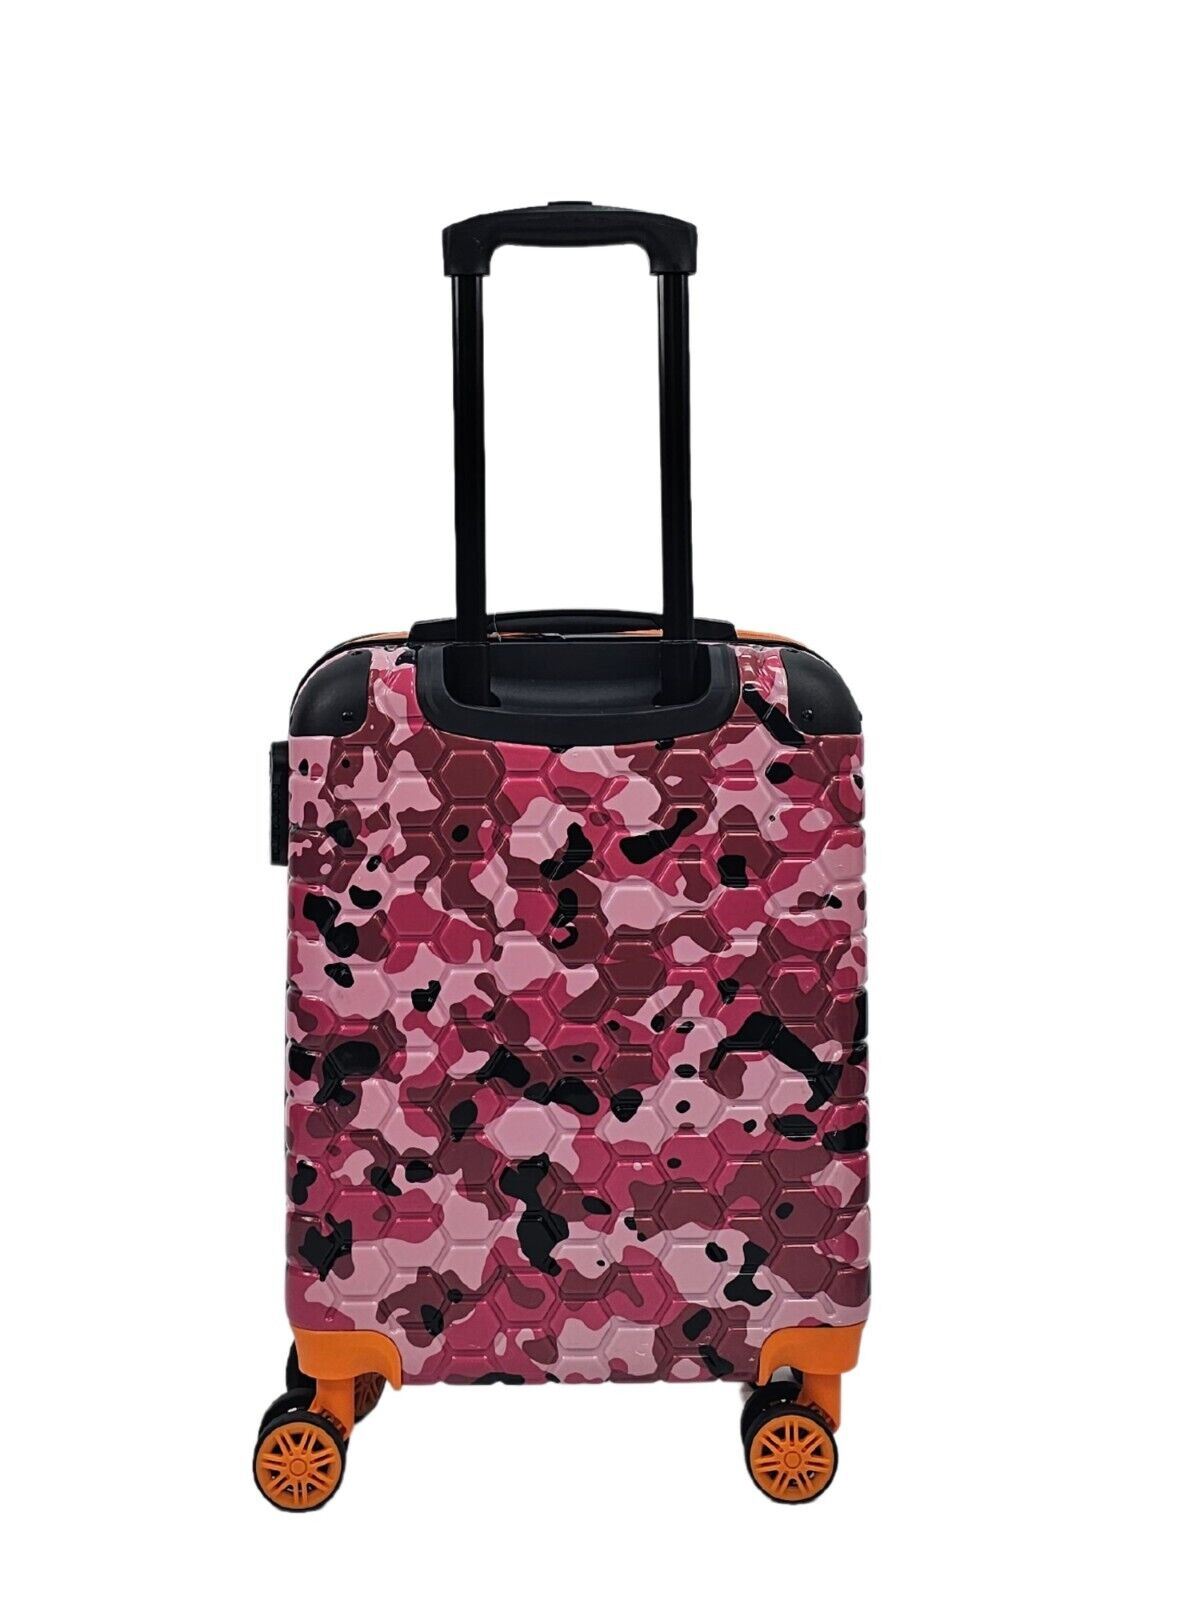 Hardshell Cabin Pink Suitcase Set Robust 8 Wheel ABS Luggage Travel Bag - Upperclass Fashions 